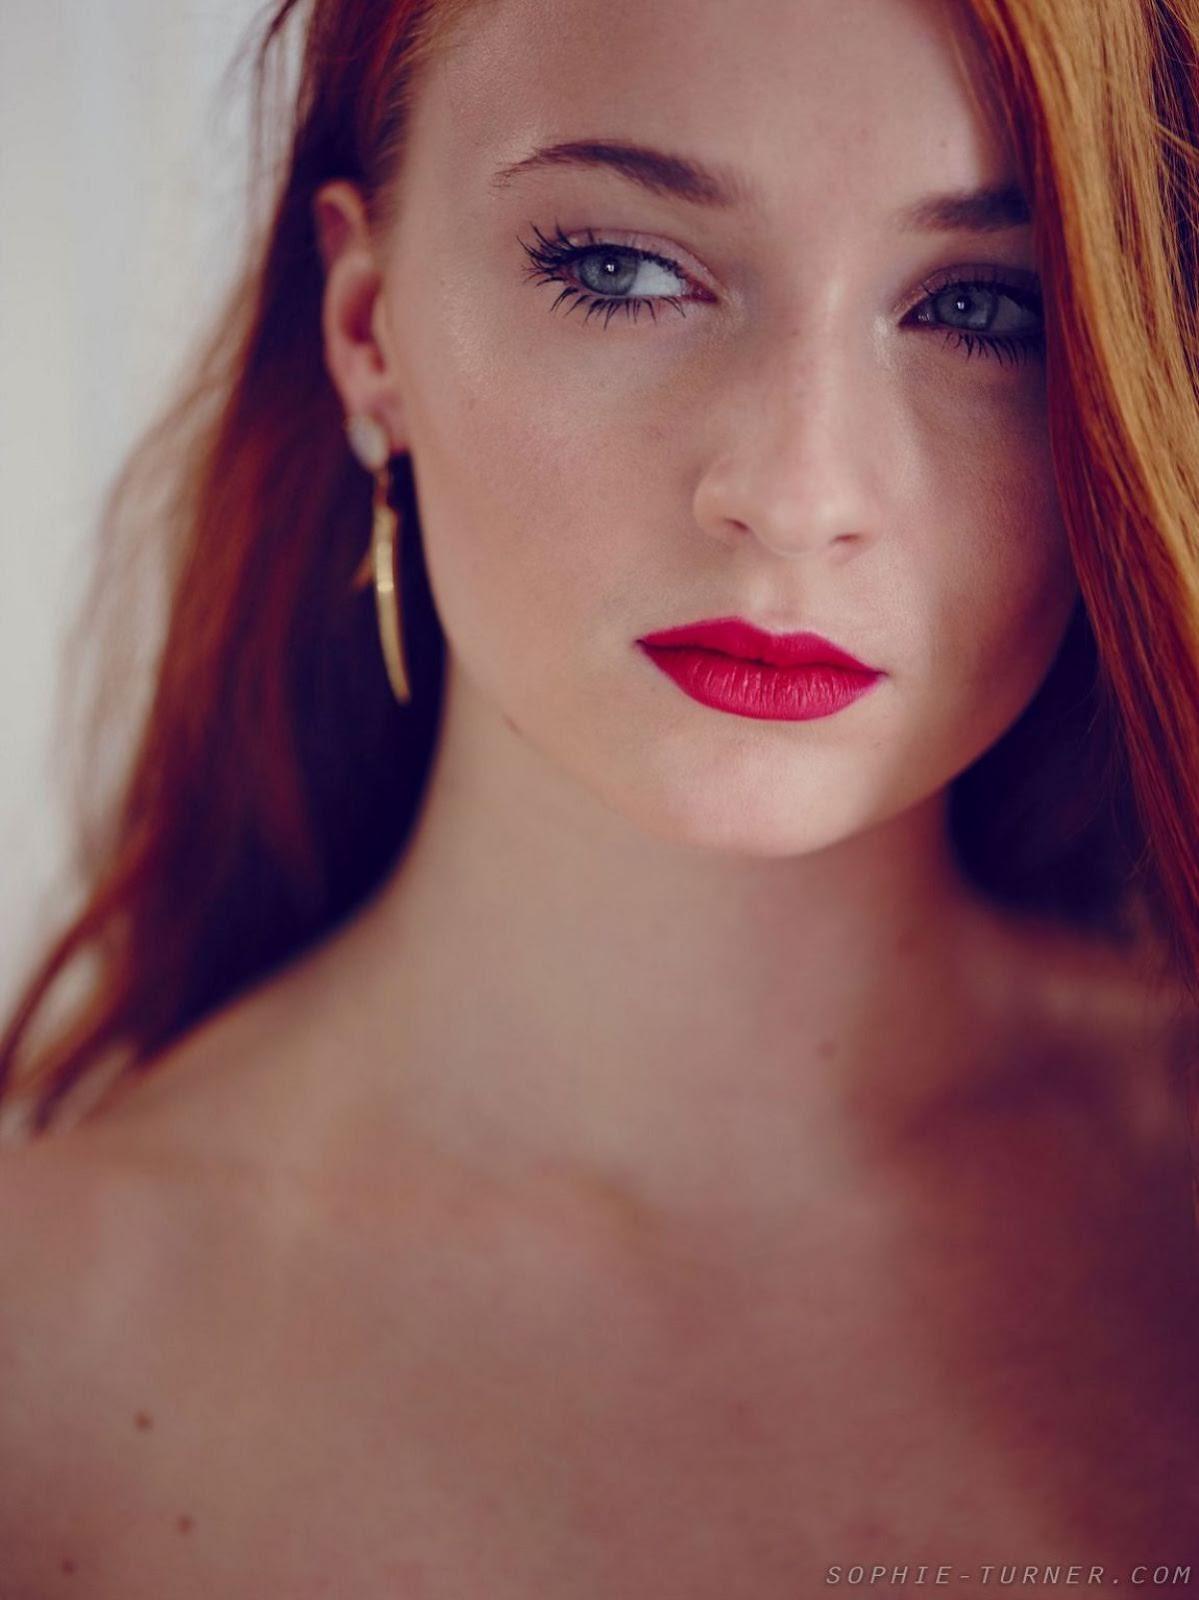 Game of Thrones' actress Sophie Turner Full HD Image & Wallpaper